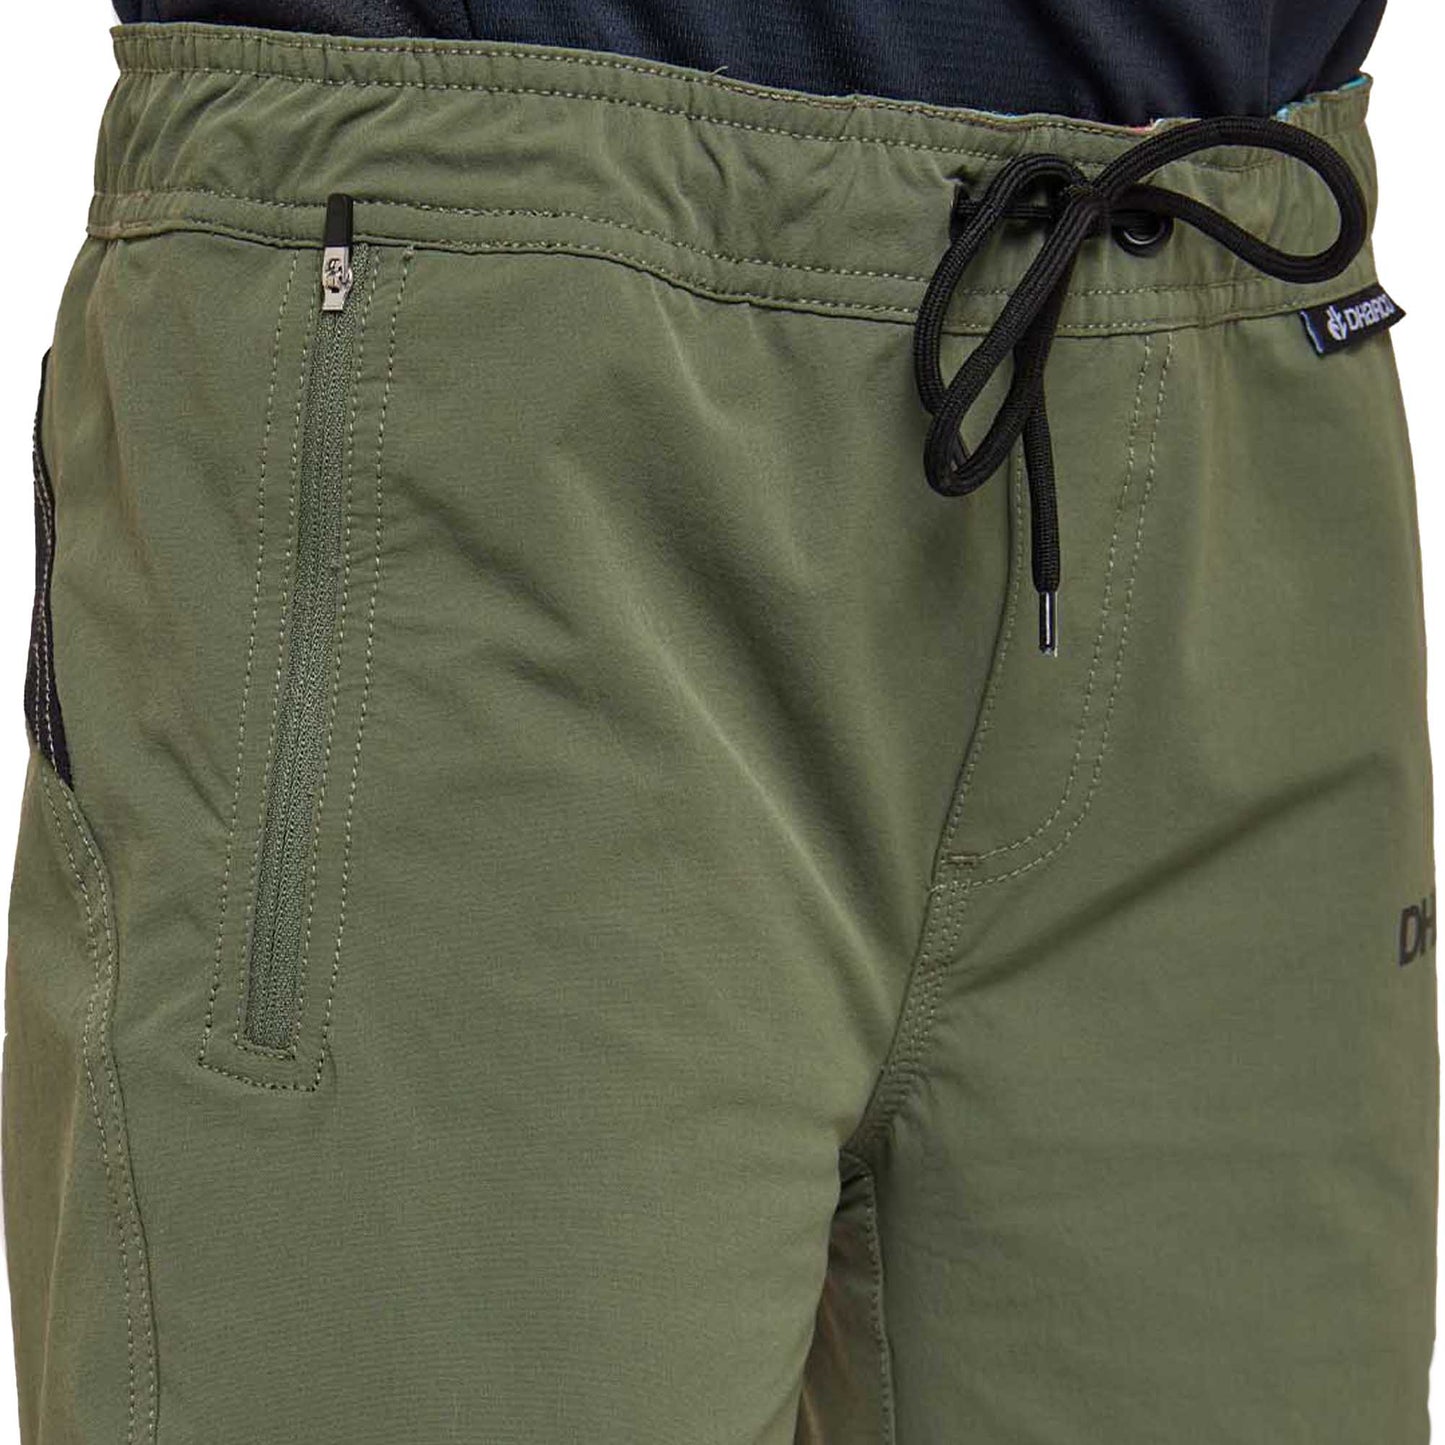 DHaRCO Youth Gravity Shorts - Youth 2XL - Gorilla Green